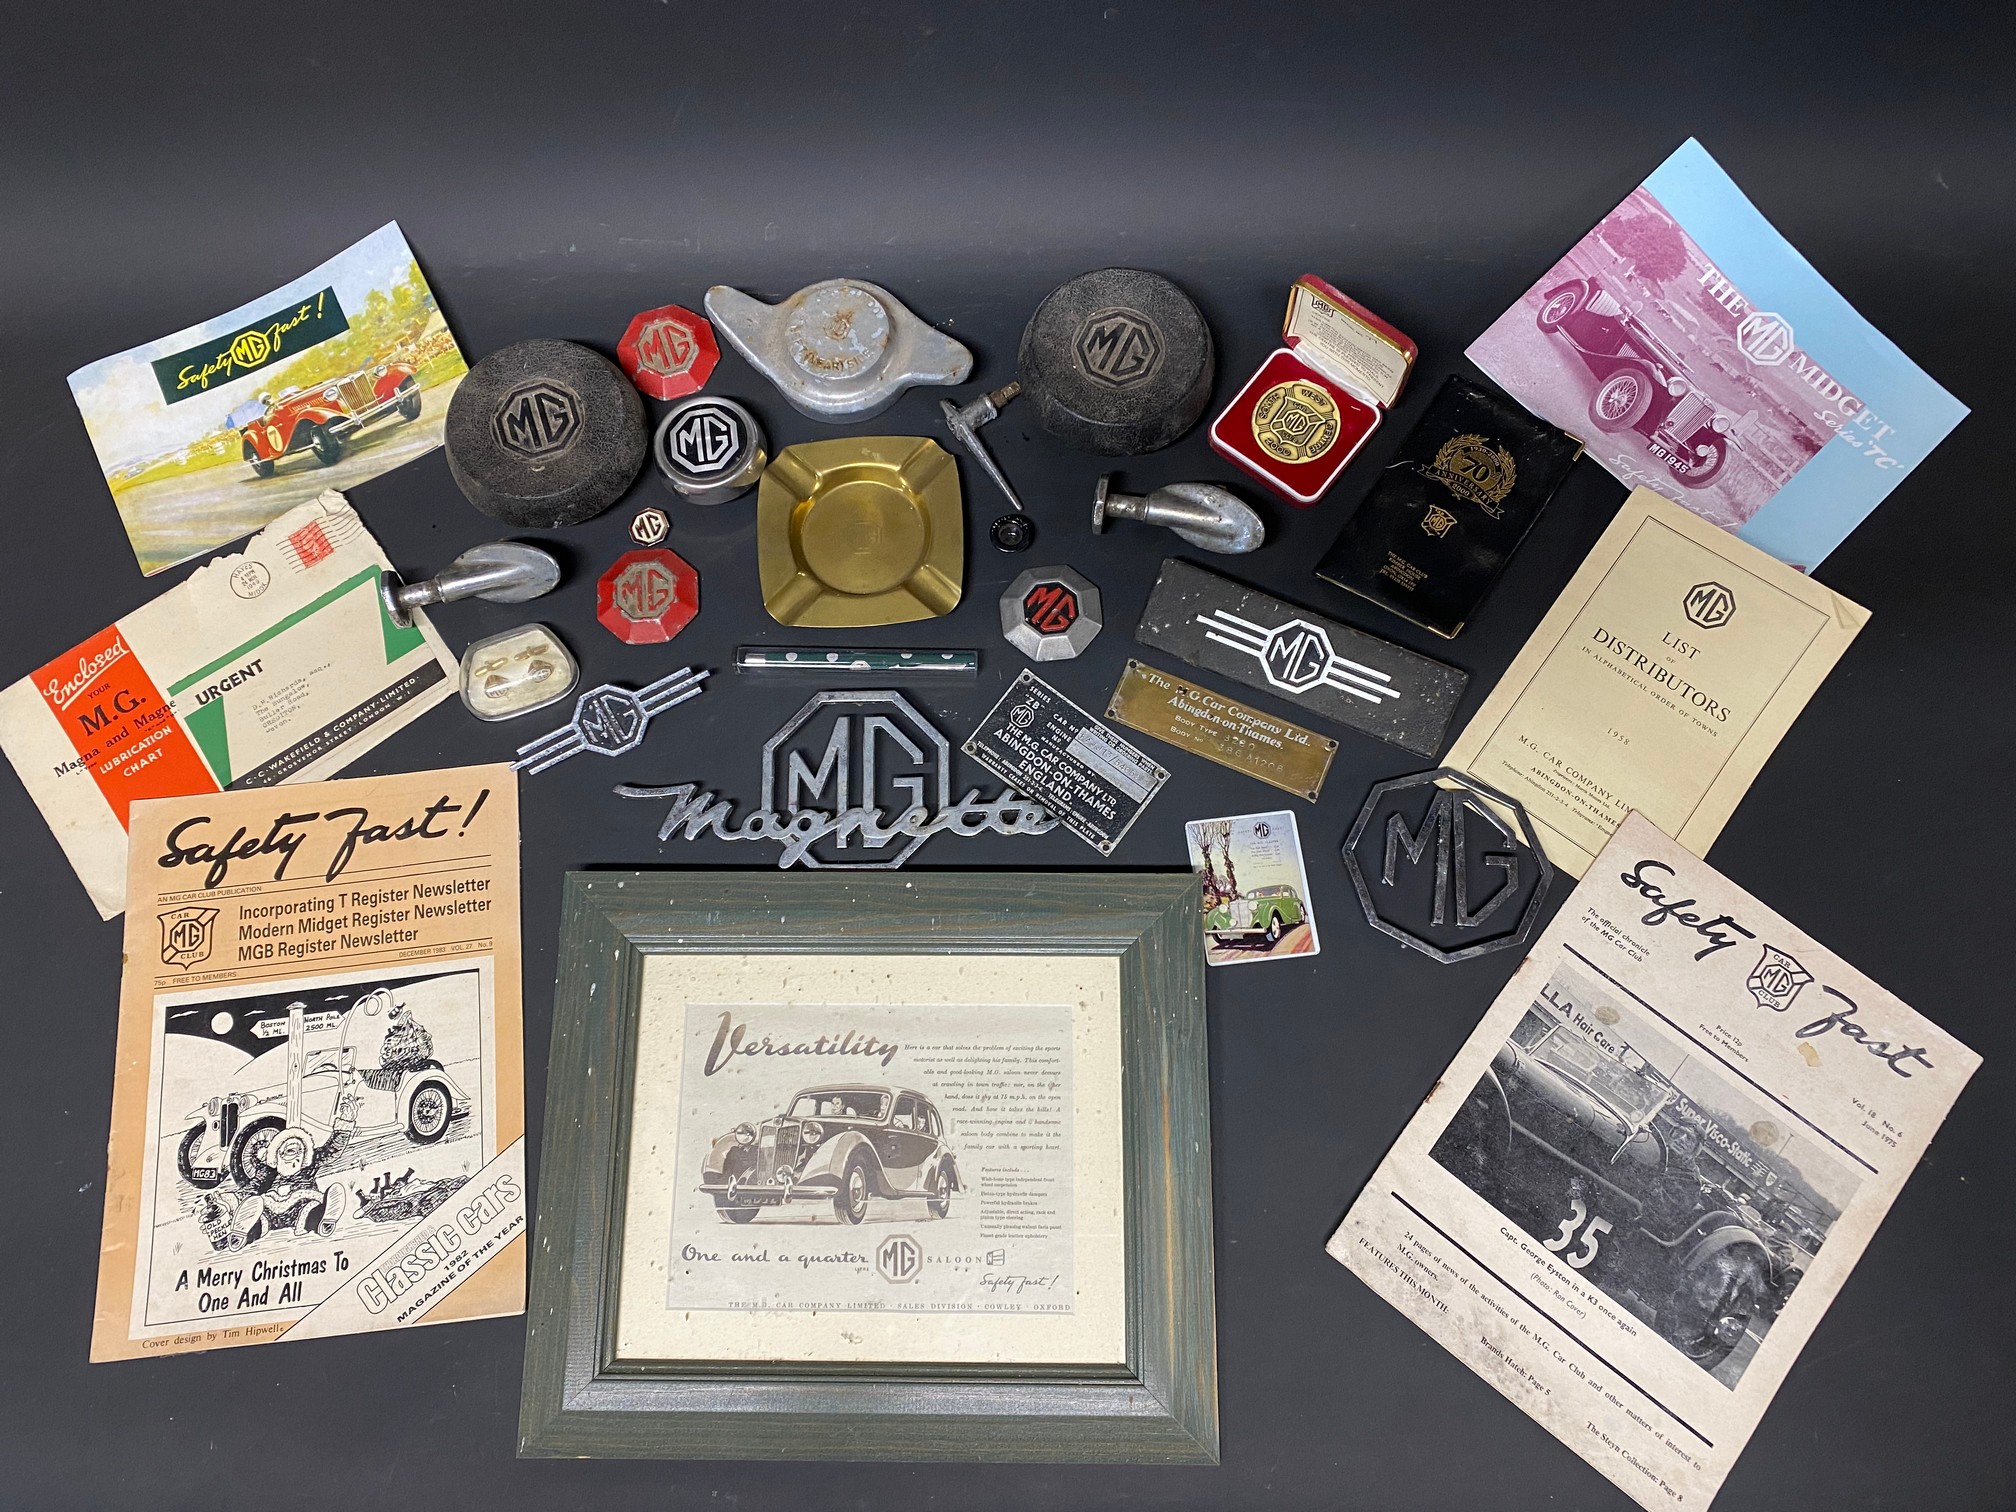 A selection of MG related promotional items, car insignia, branded car parts etc.